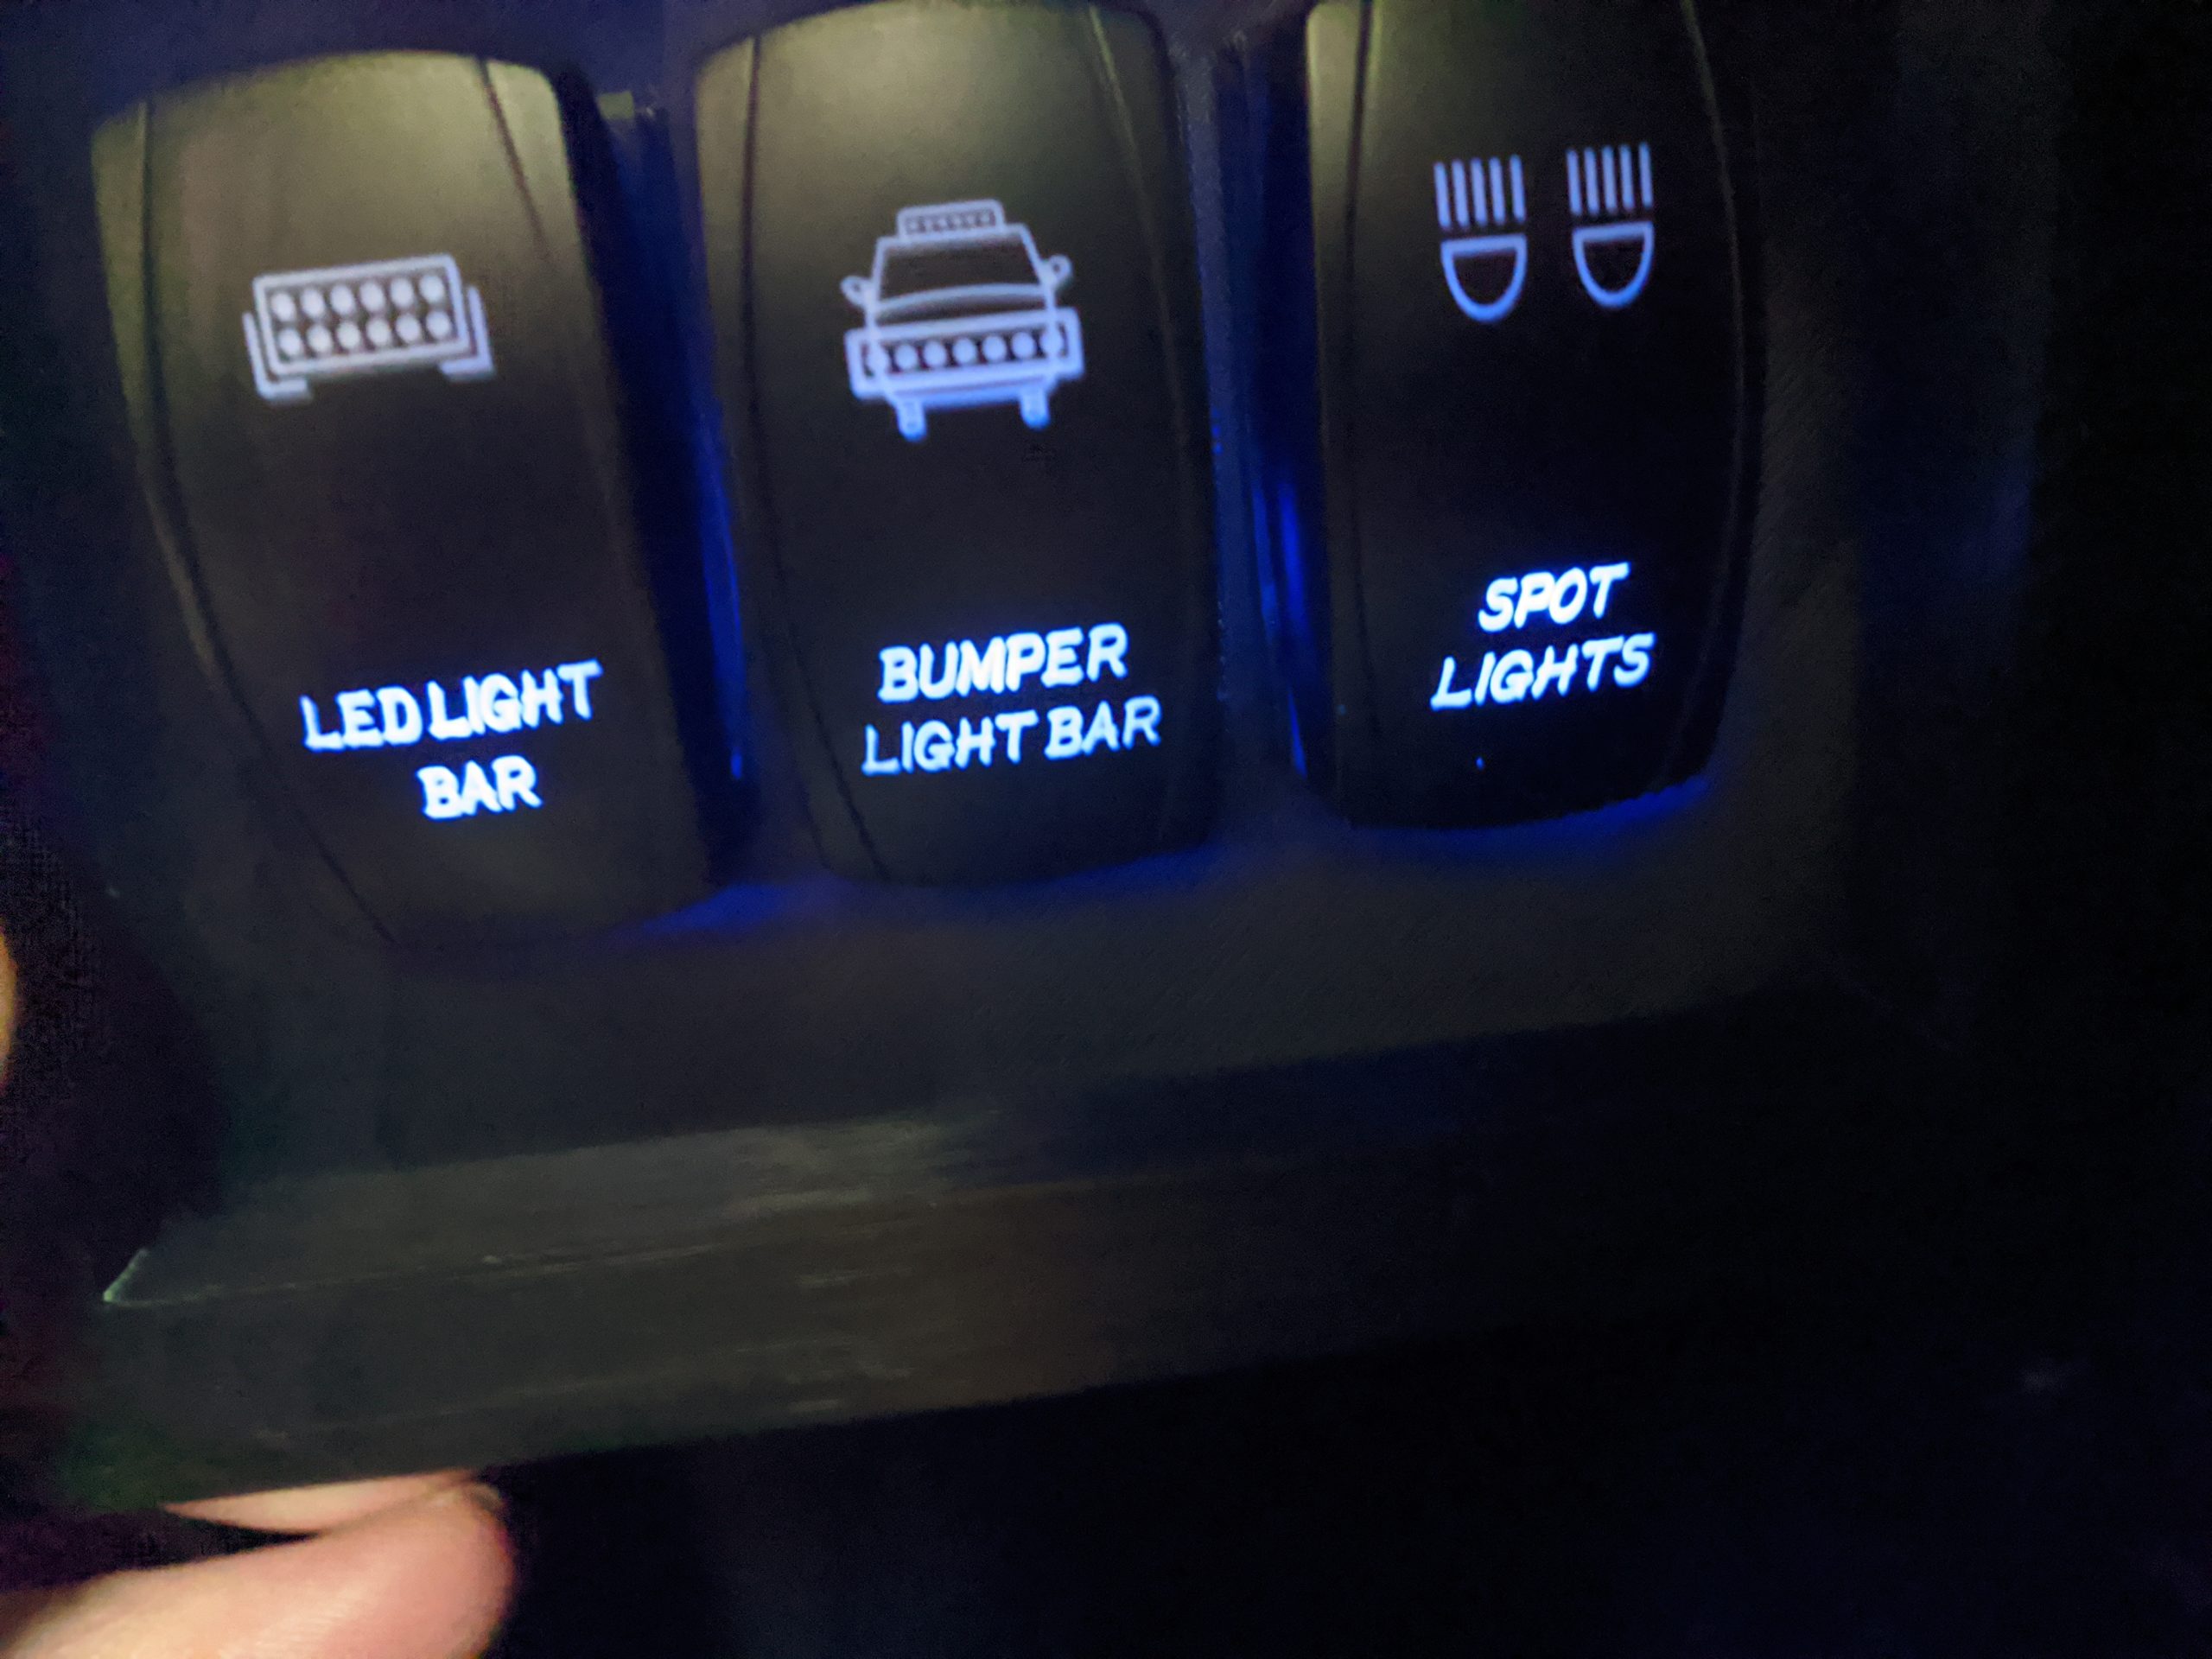 Switches light up on the bottom with key on, then light up on top when activated